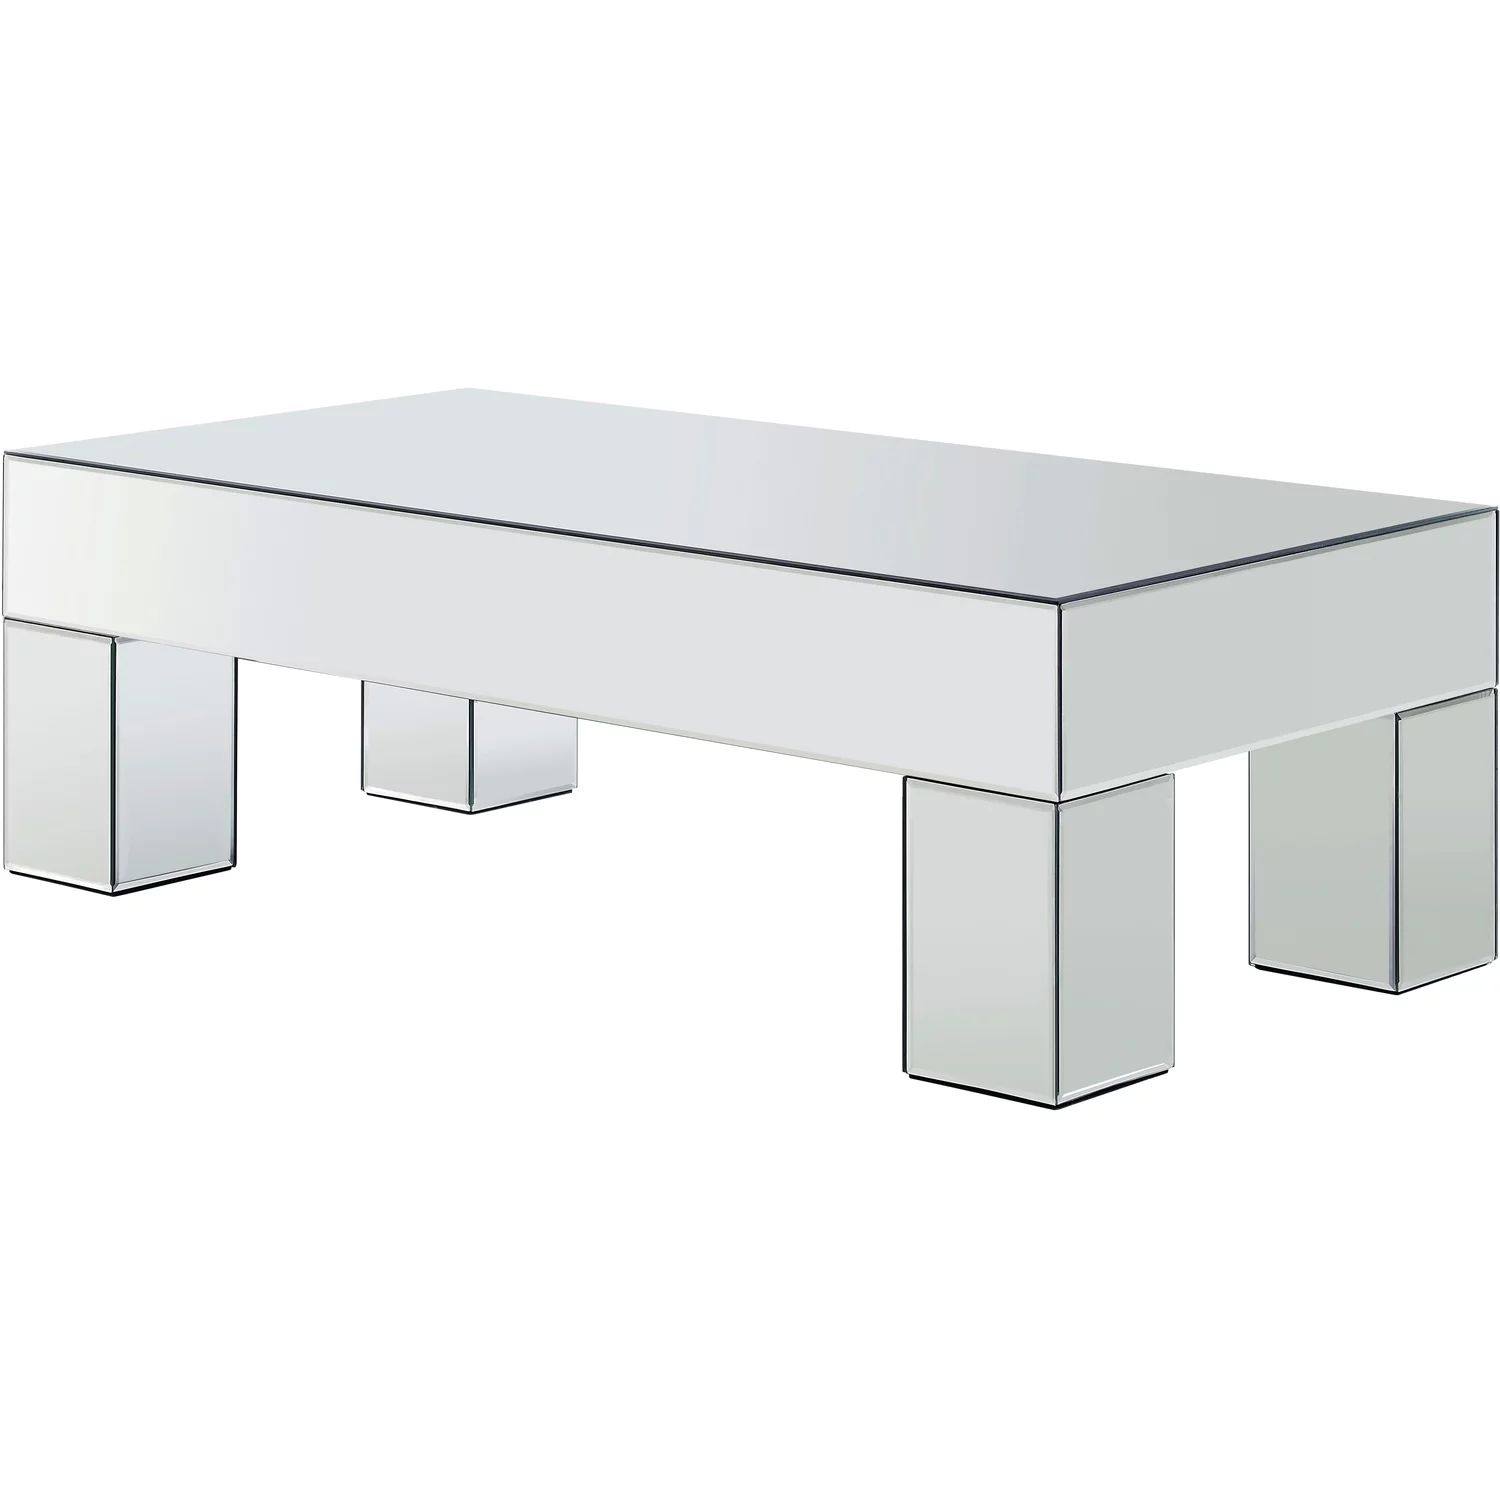 Lainy Mirrored Coffee Table-Color:Mirrored,Finish:Mirrored,Style:Contemporary | Walmart (US)